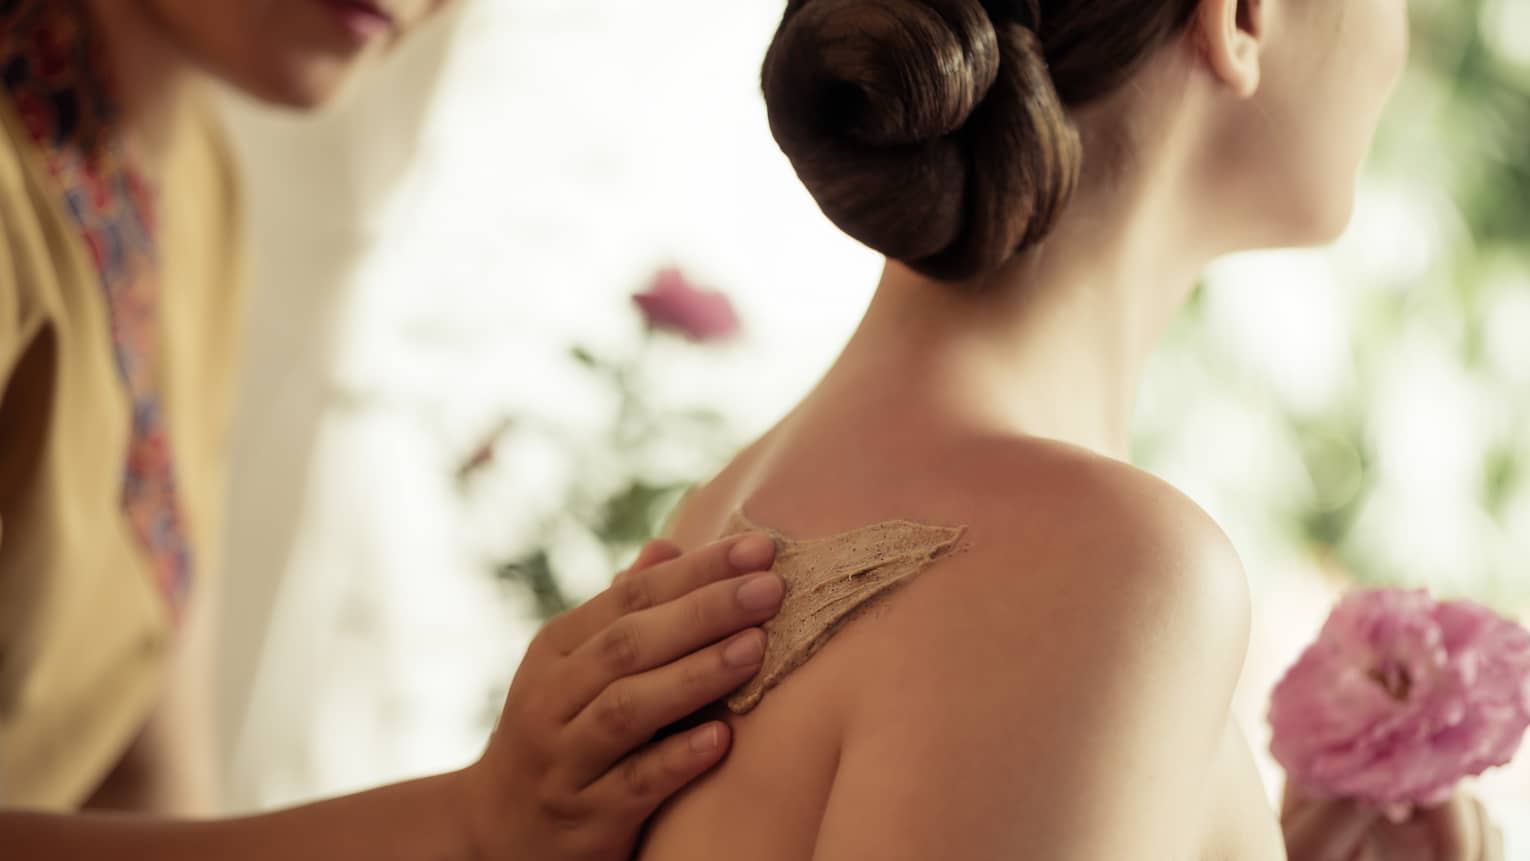 Spa staff rubs thick lotion on woman's bare shoulders as she holds a fresh flower